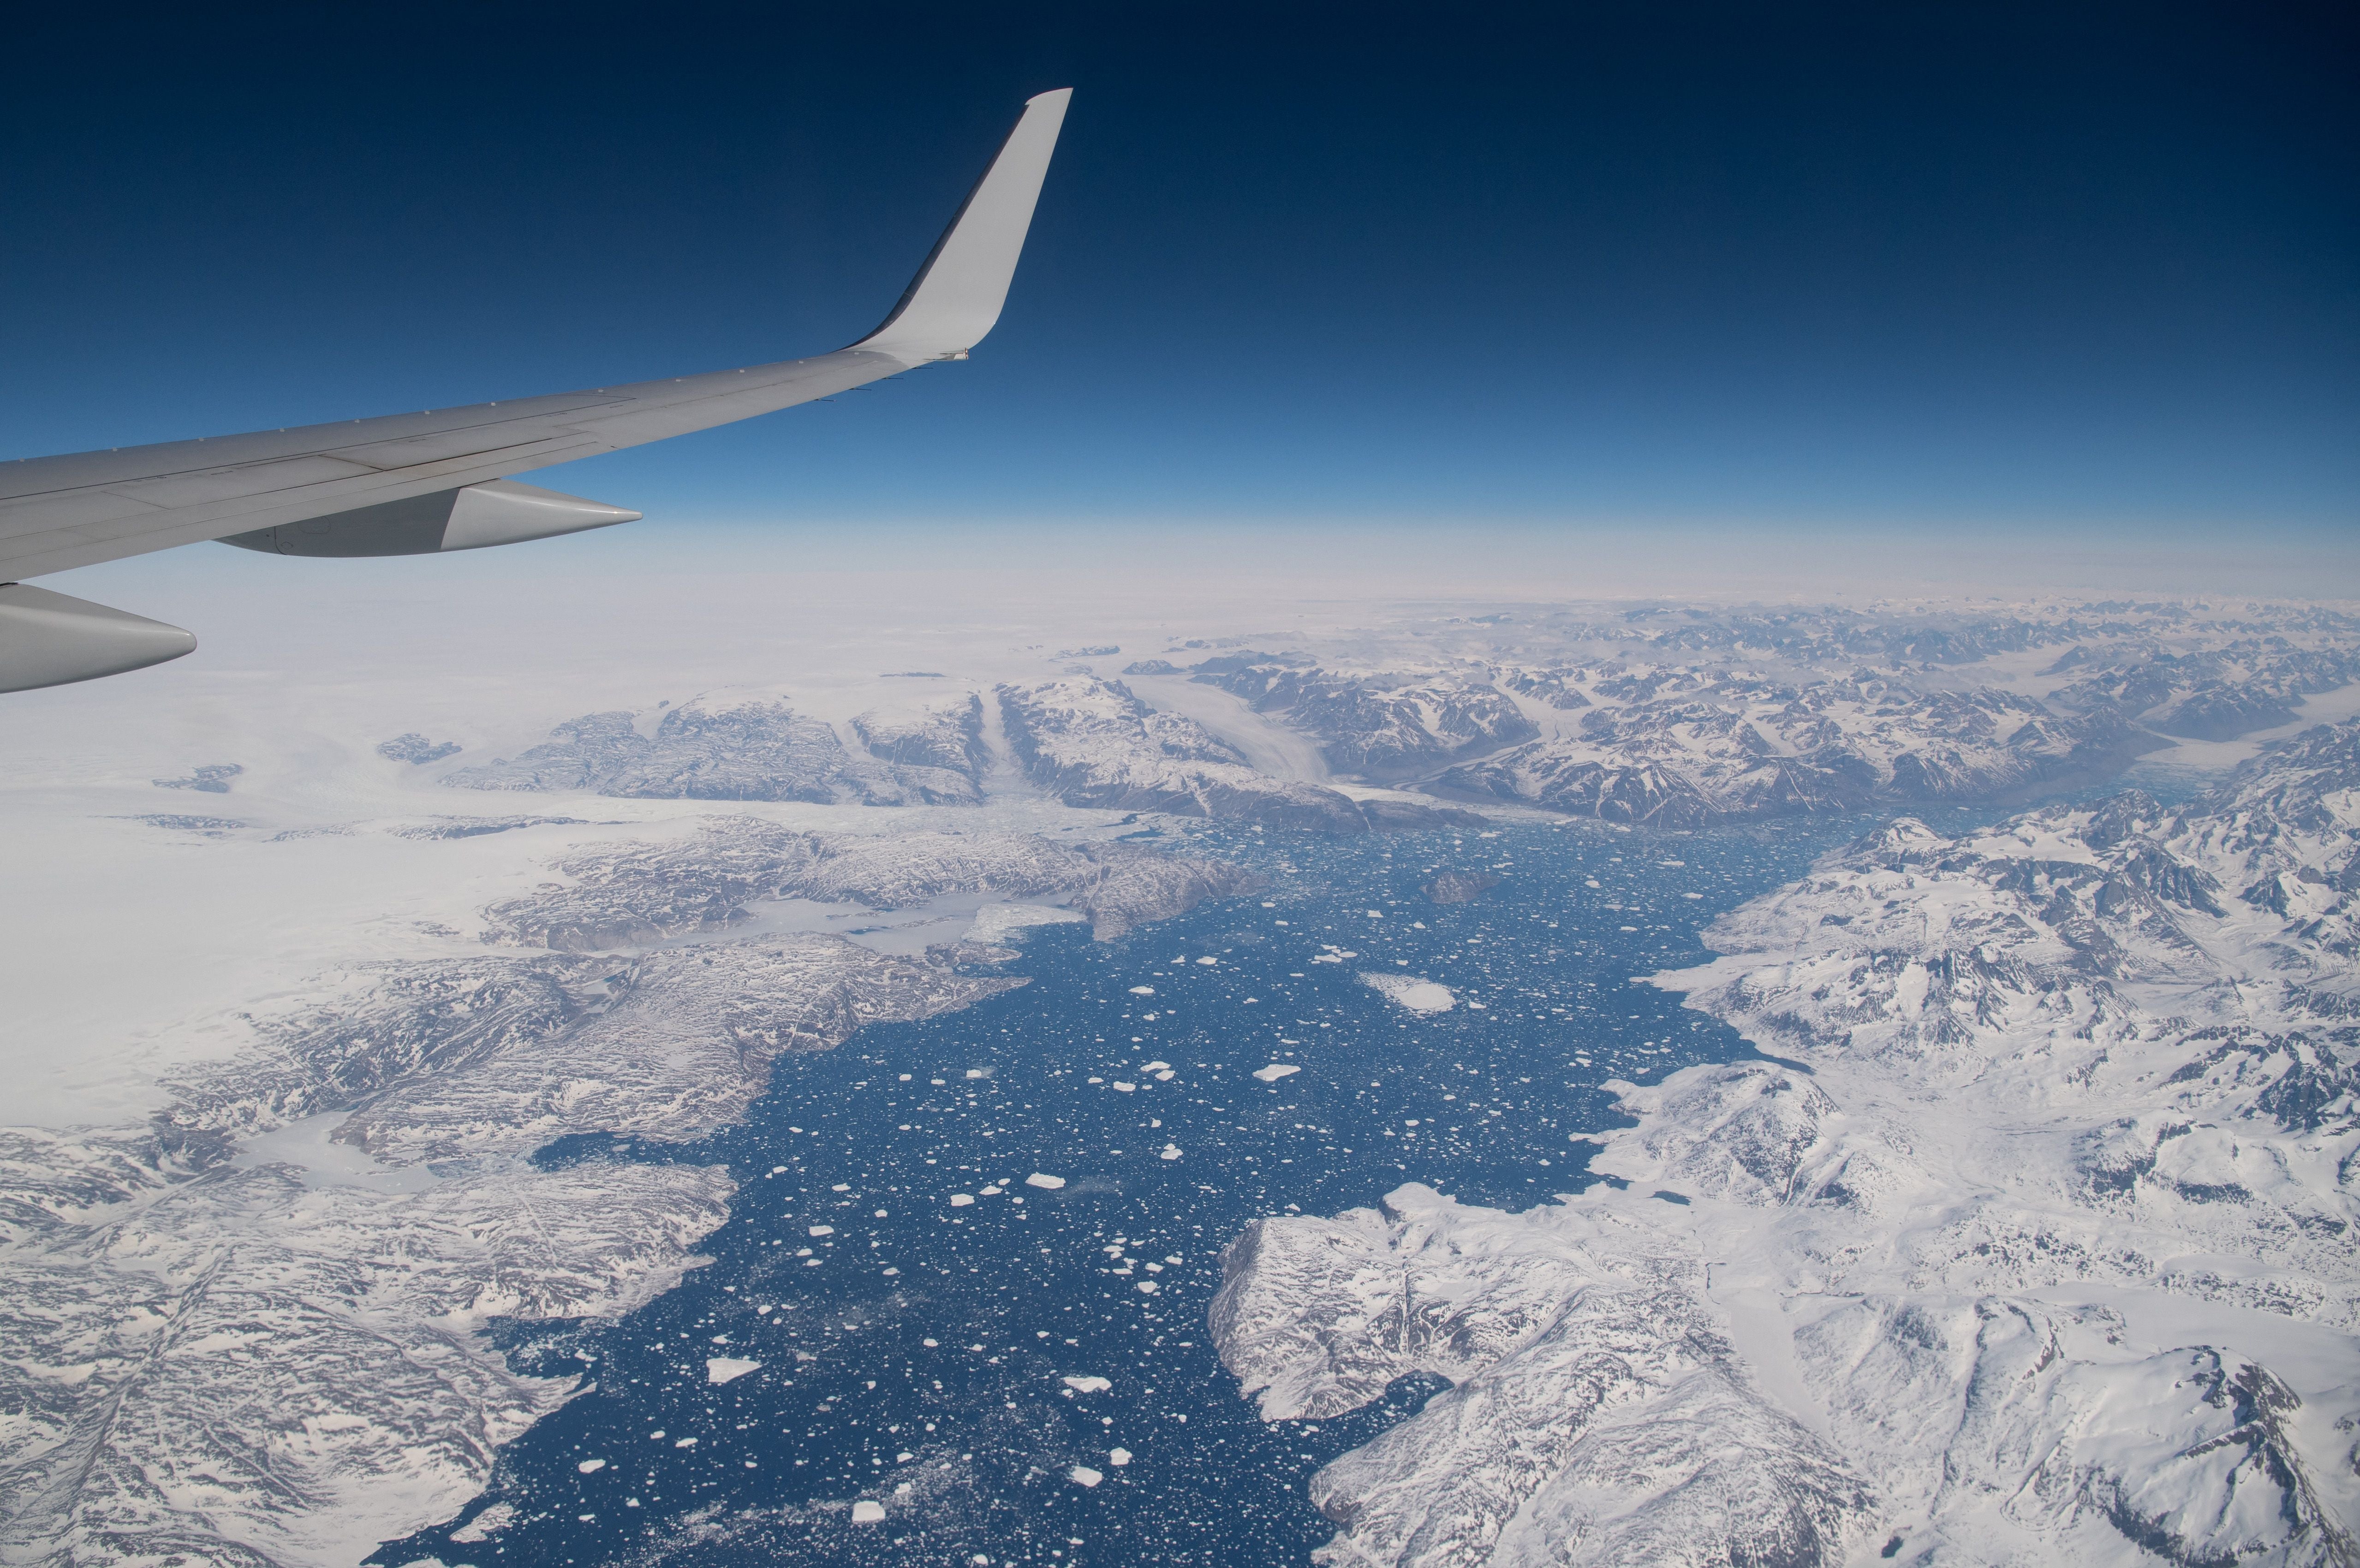 A view of eastern Greenland from the air in May 2021